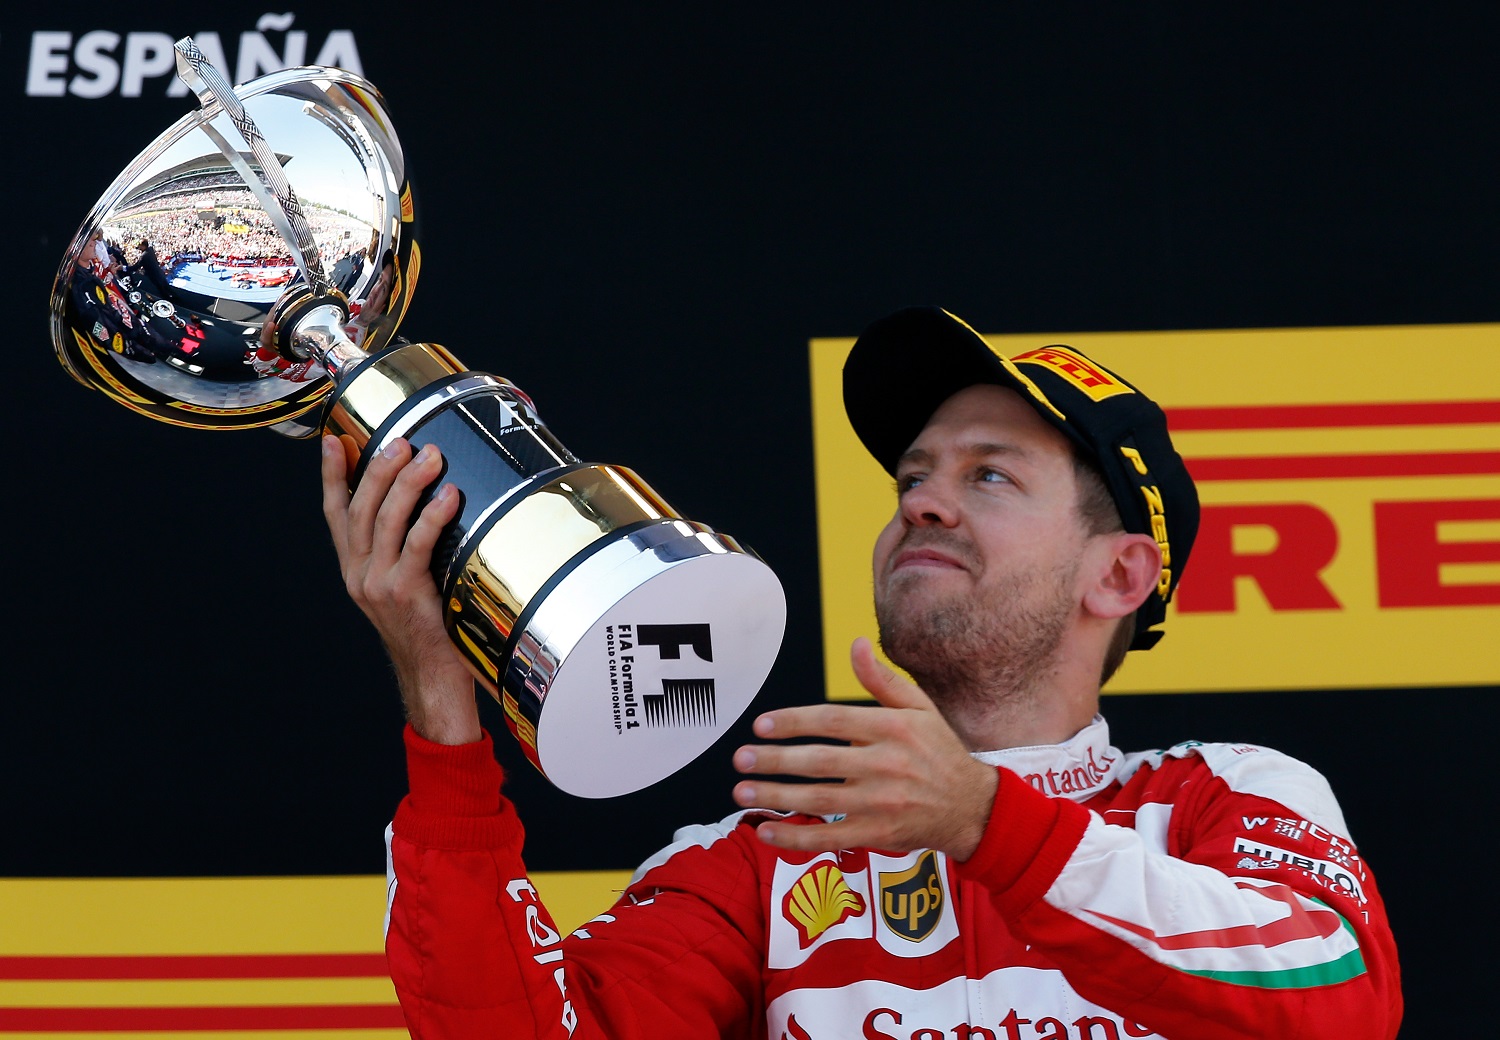 Ferrari driver Sebastian Vettel of Germany holds his third place trophy on the podium of the Spanish Formula One Grand Prix at the Barcelona Catalunya racetrack in Montmelo, just outside Barcelona, Spain, Sunday, May 15, 2016. (AP Photo/Manu Fernandez)